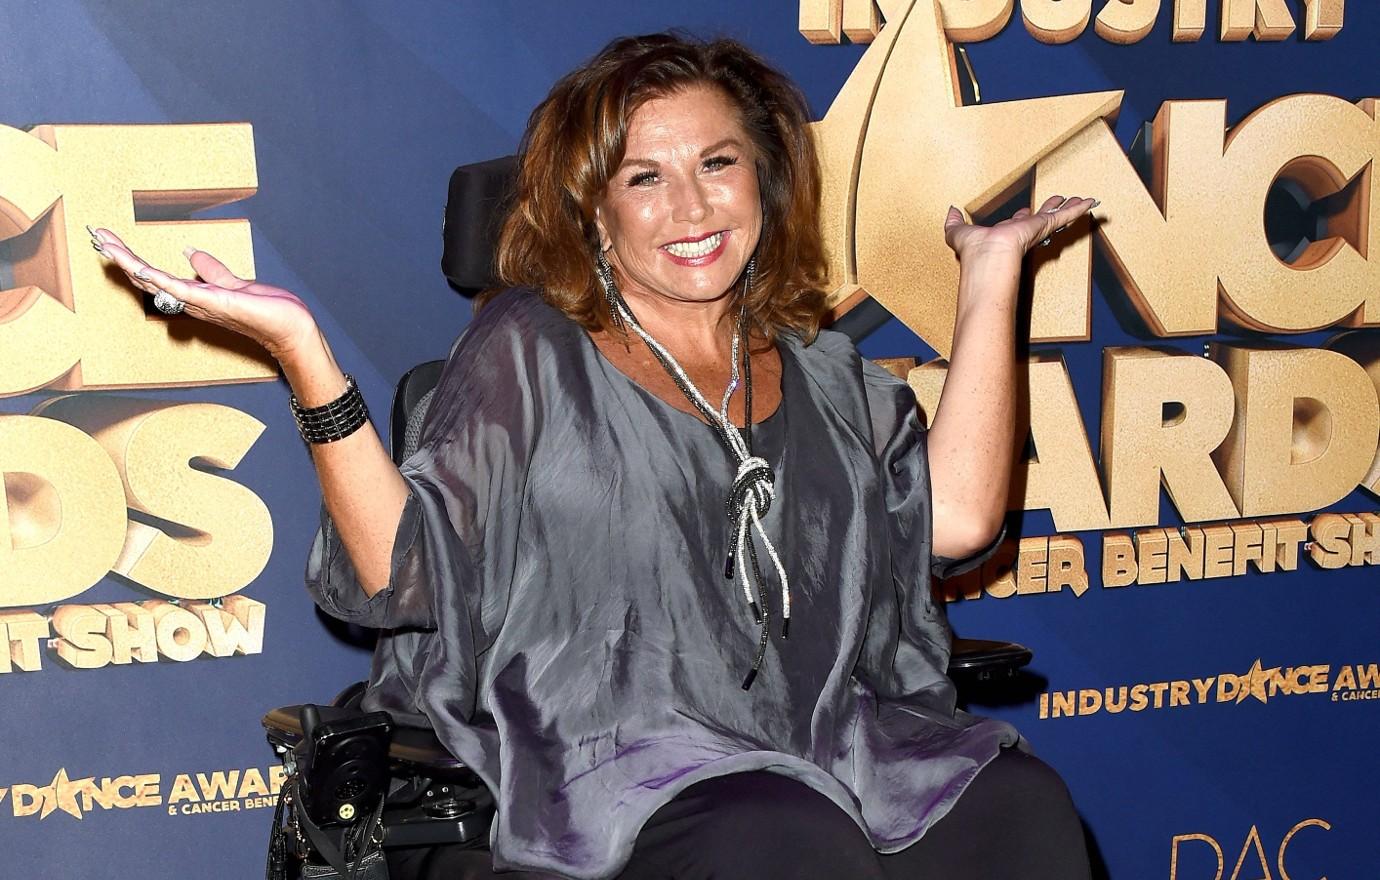 Lifetime cancels plans to air Abby Lee Miller reality show after